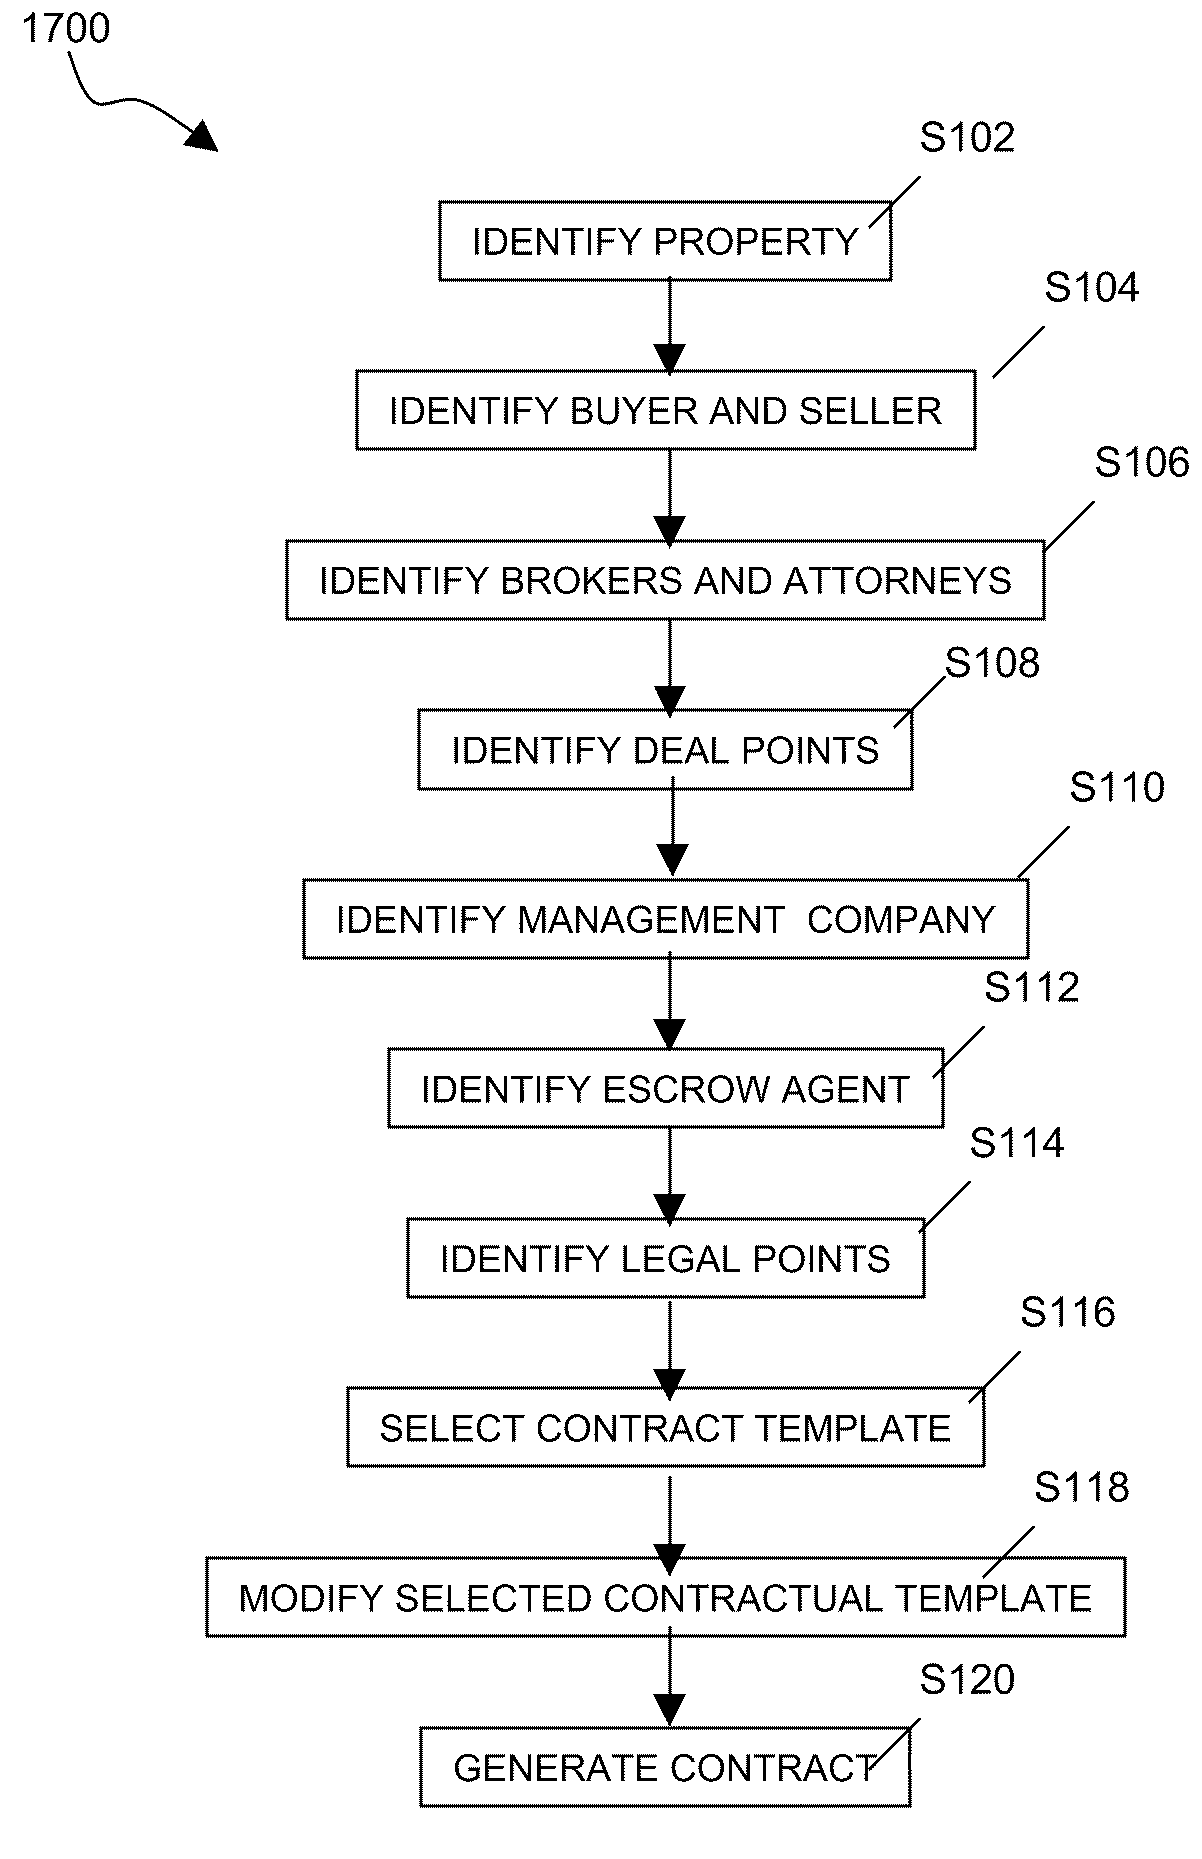 Online closing system and method